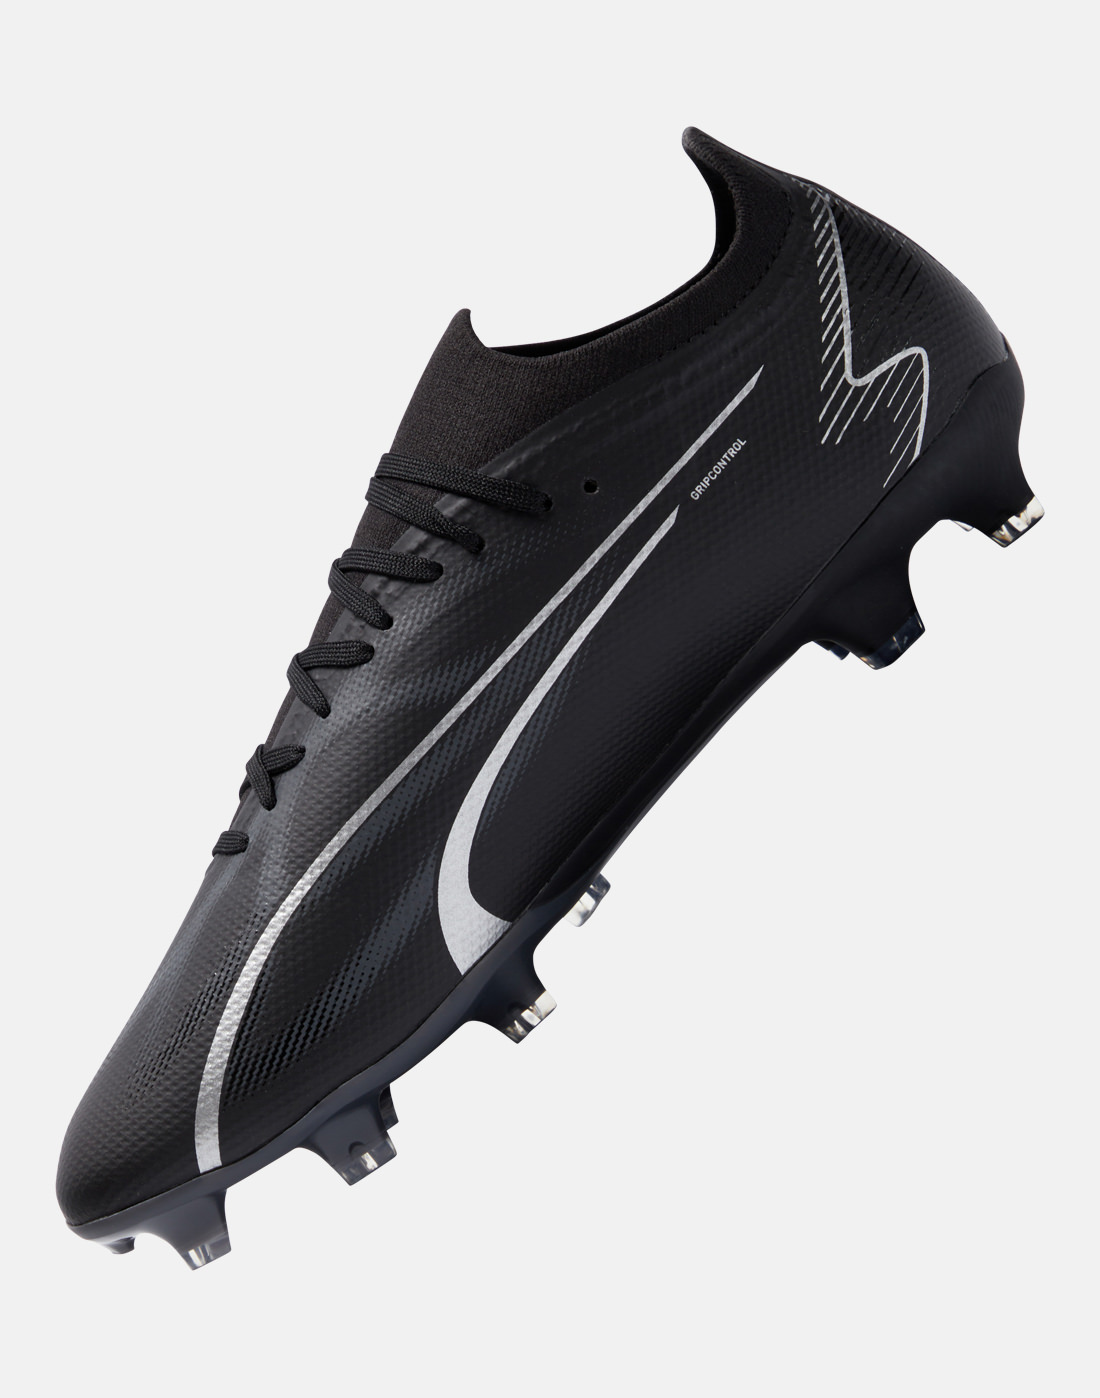 Puma Adults Ultra Match Firm Ground - Black | Life Style Sports IE